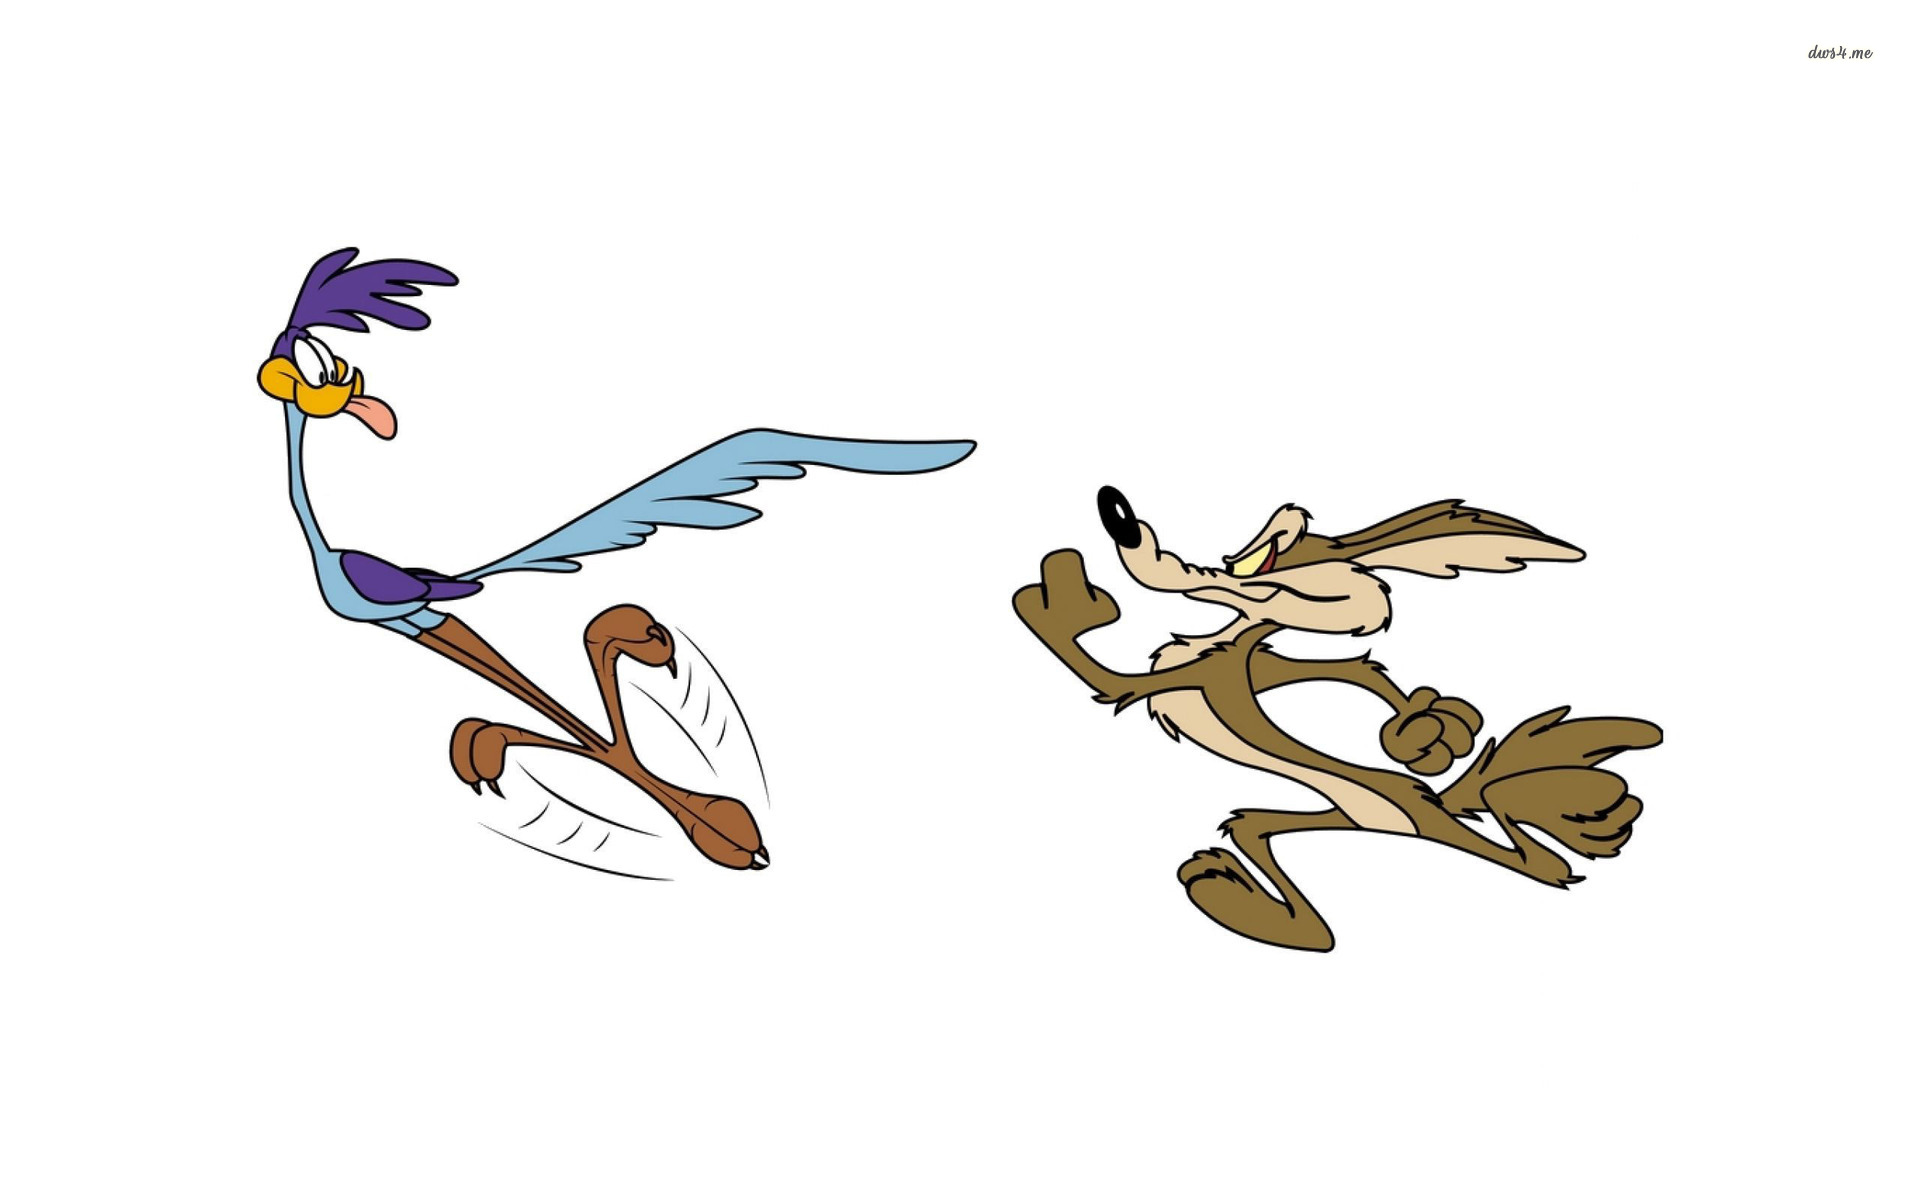 wile coyote and the road runner